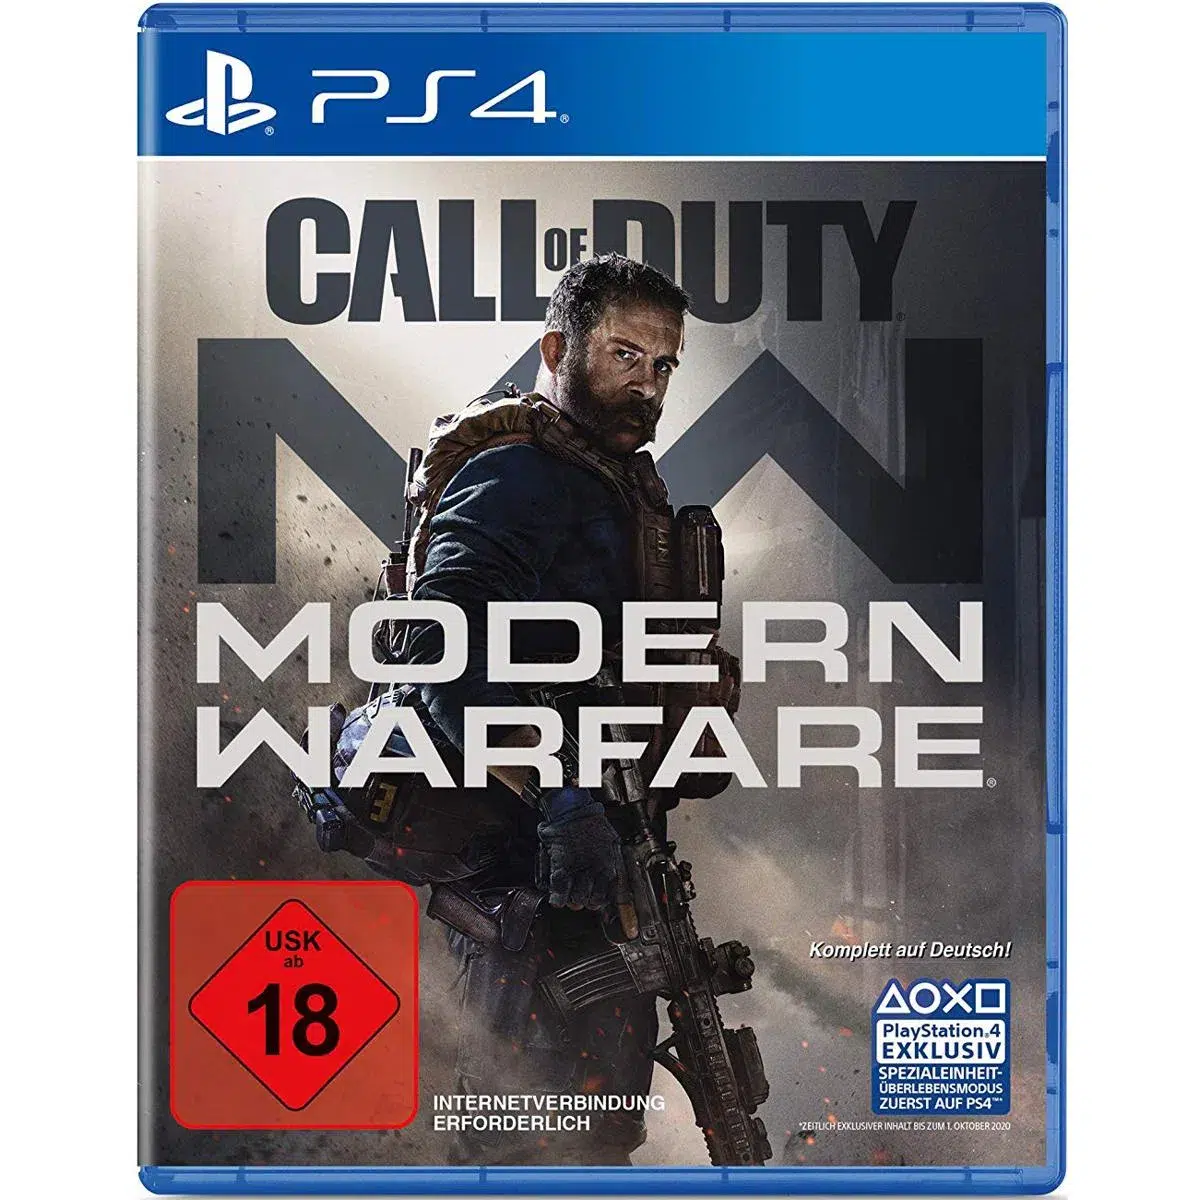 Call of Duty: Modern Warfare - Exclusive Edition (PS4) (USK)